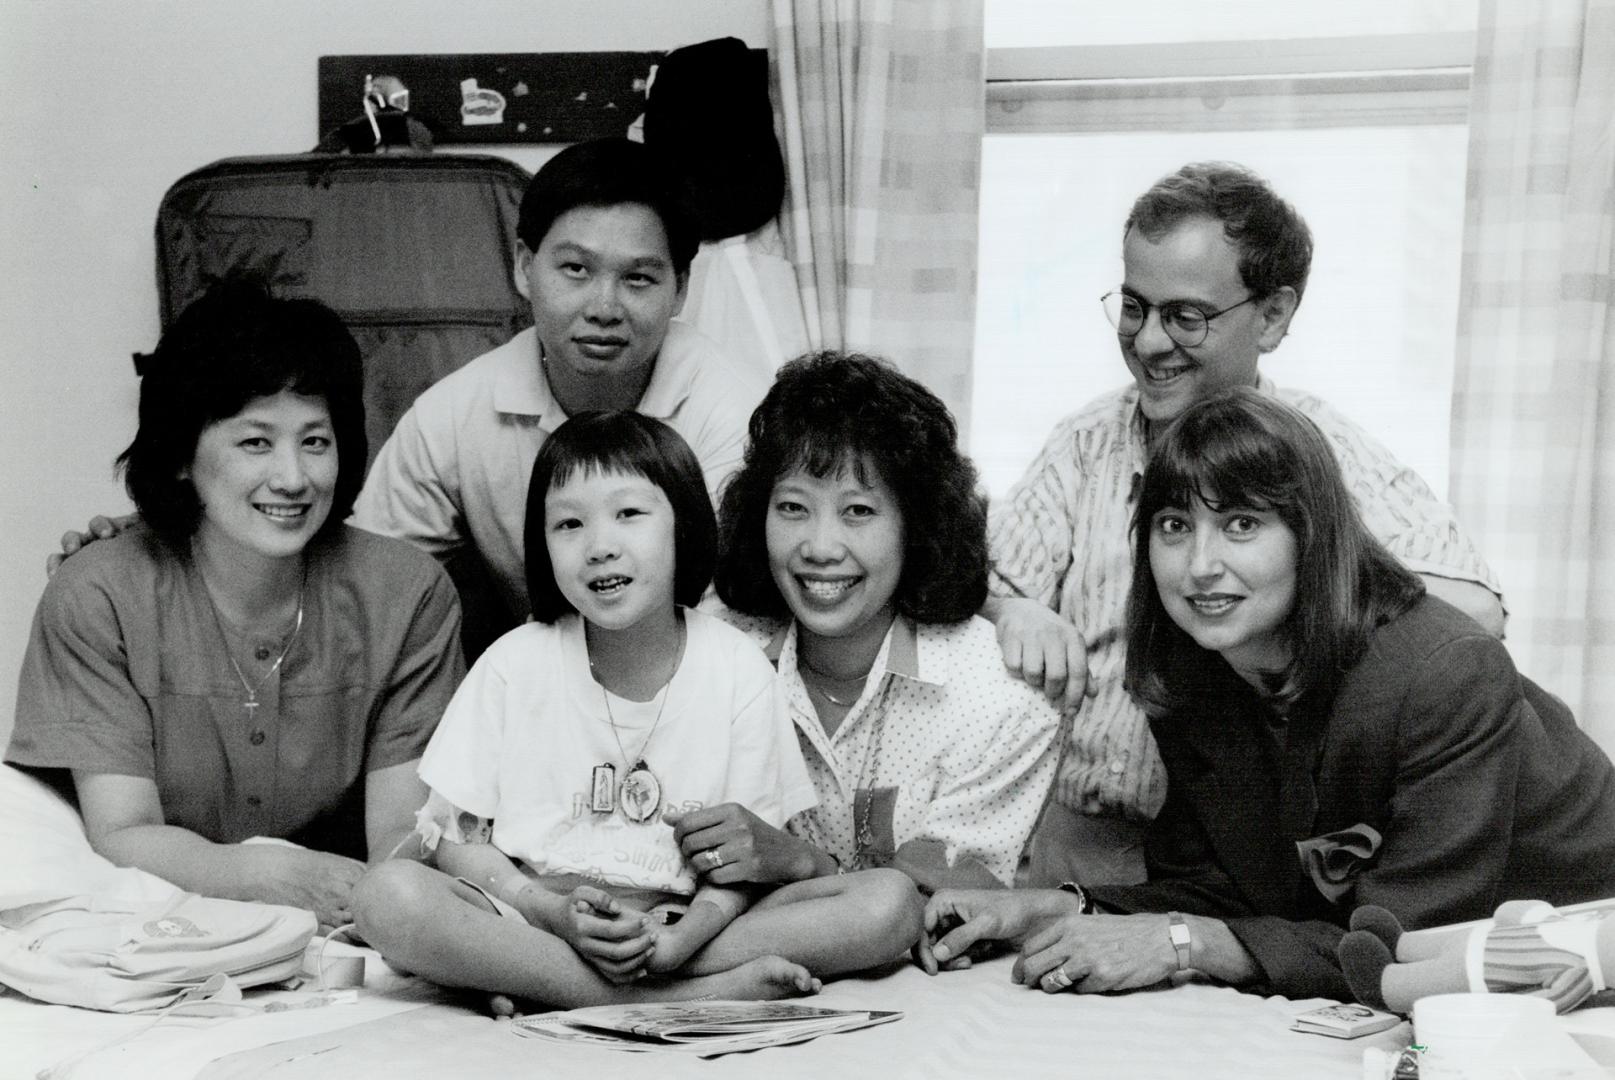 Team of fighters: Elizabeth Lue, 6, smiles as family and friends visit in hospital. From left, mother Phillipa and father Gary, aunt Julie Ho-Tseung, and campaign organizers Dr. Marshall Deltoff and Helen Cox.